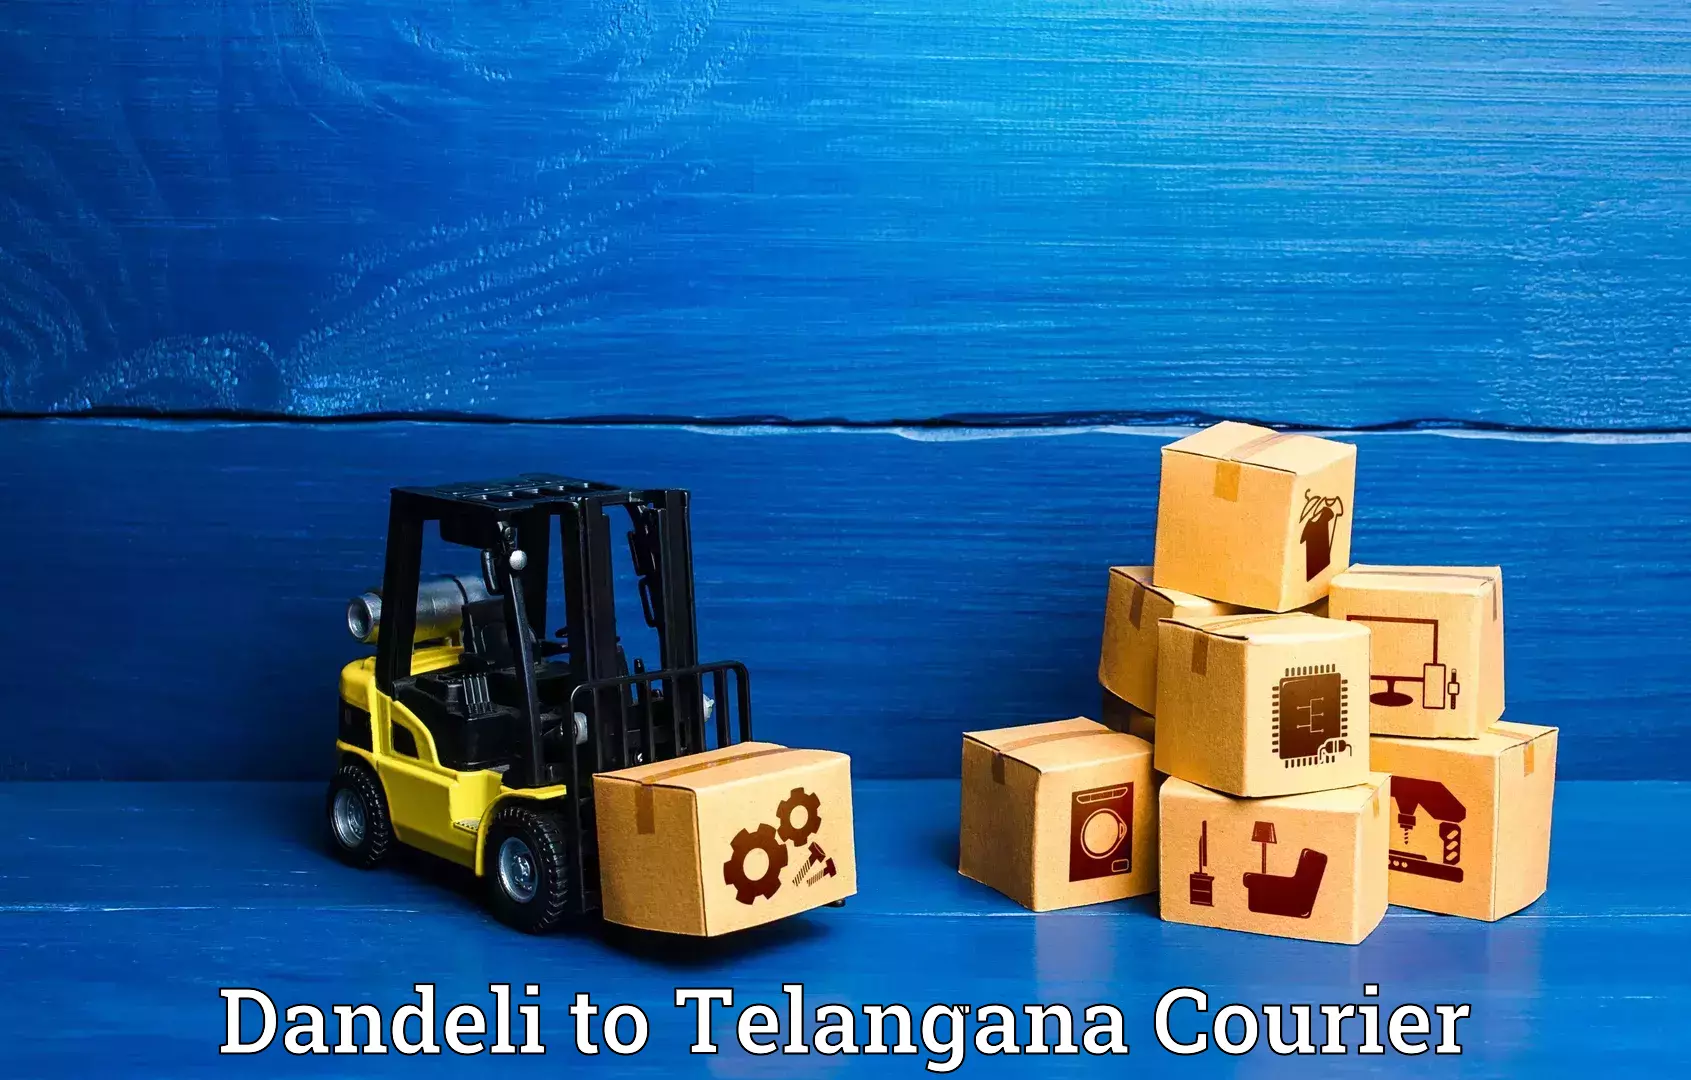 Luggage transport consultancy Dandeli to Danthalapally